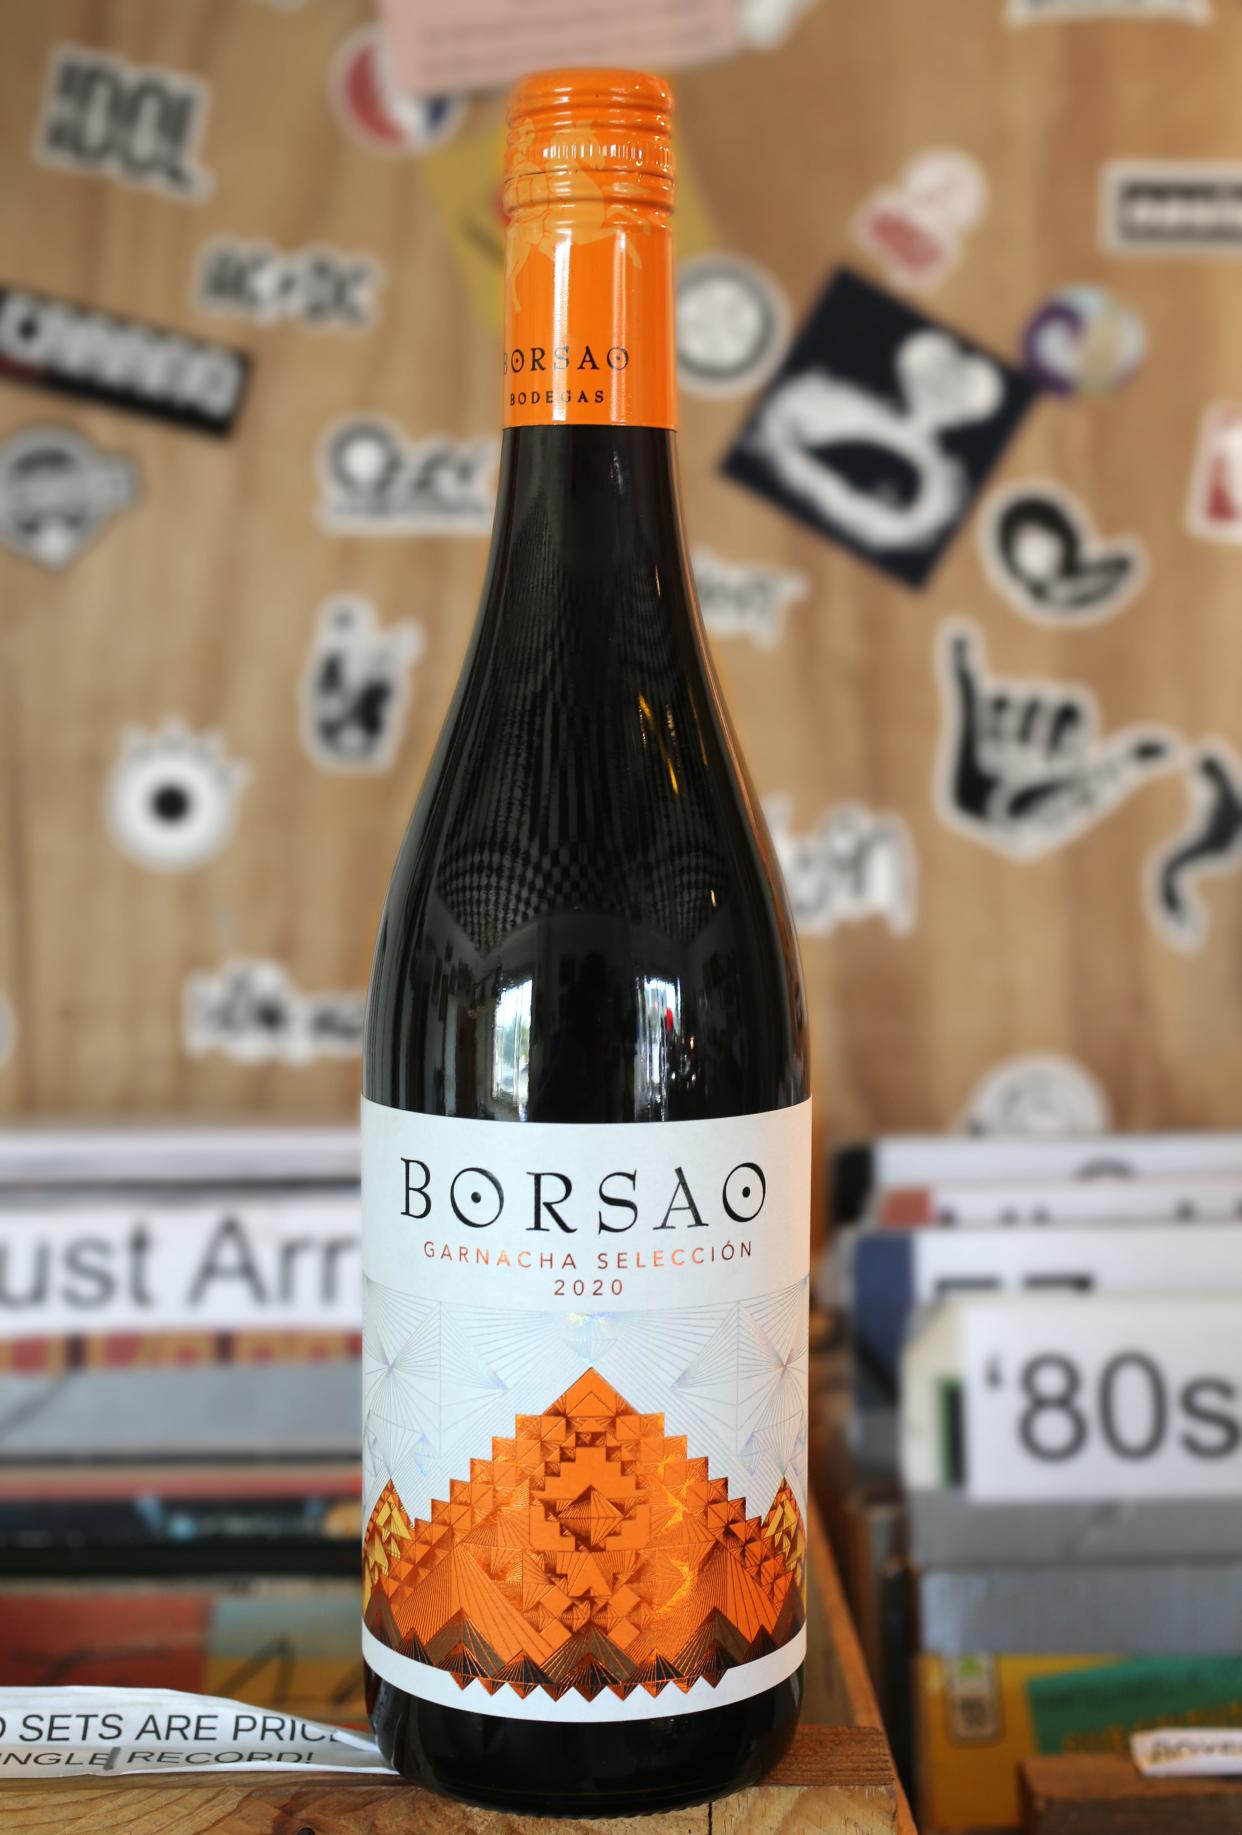 An $11.99 bottle of Borsao Garnacha Seleccion rests on a stack of vinyl albums in the Jenks Building billiard room in Cuyahoga Falls.